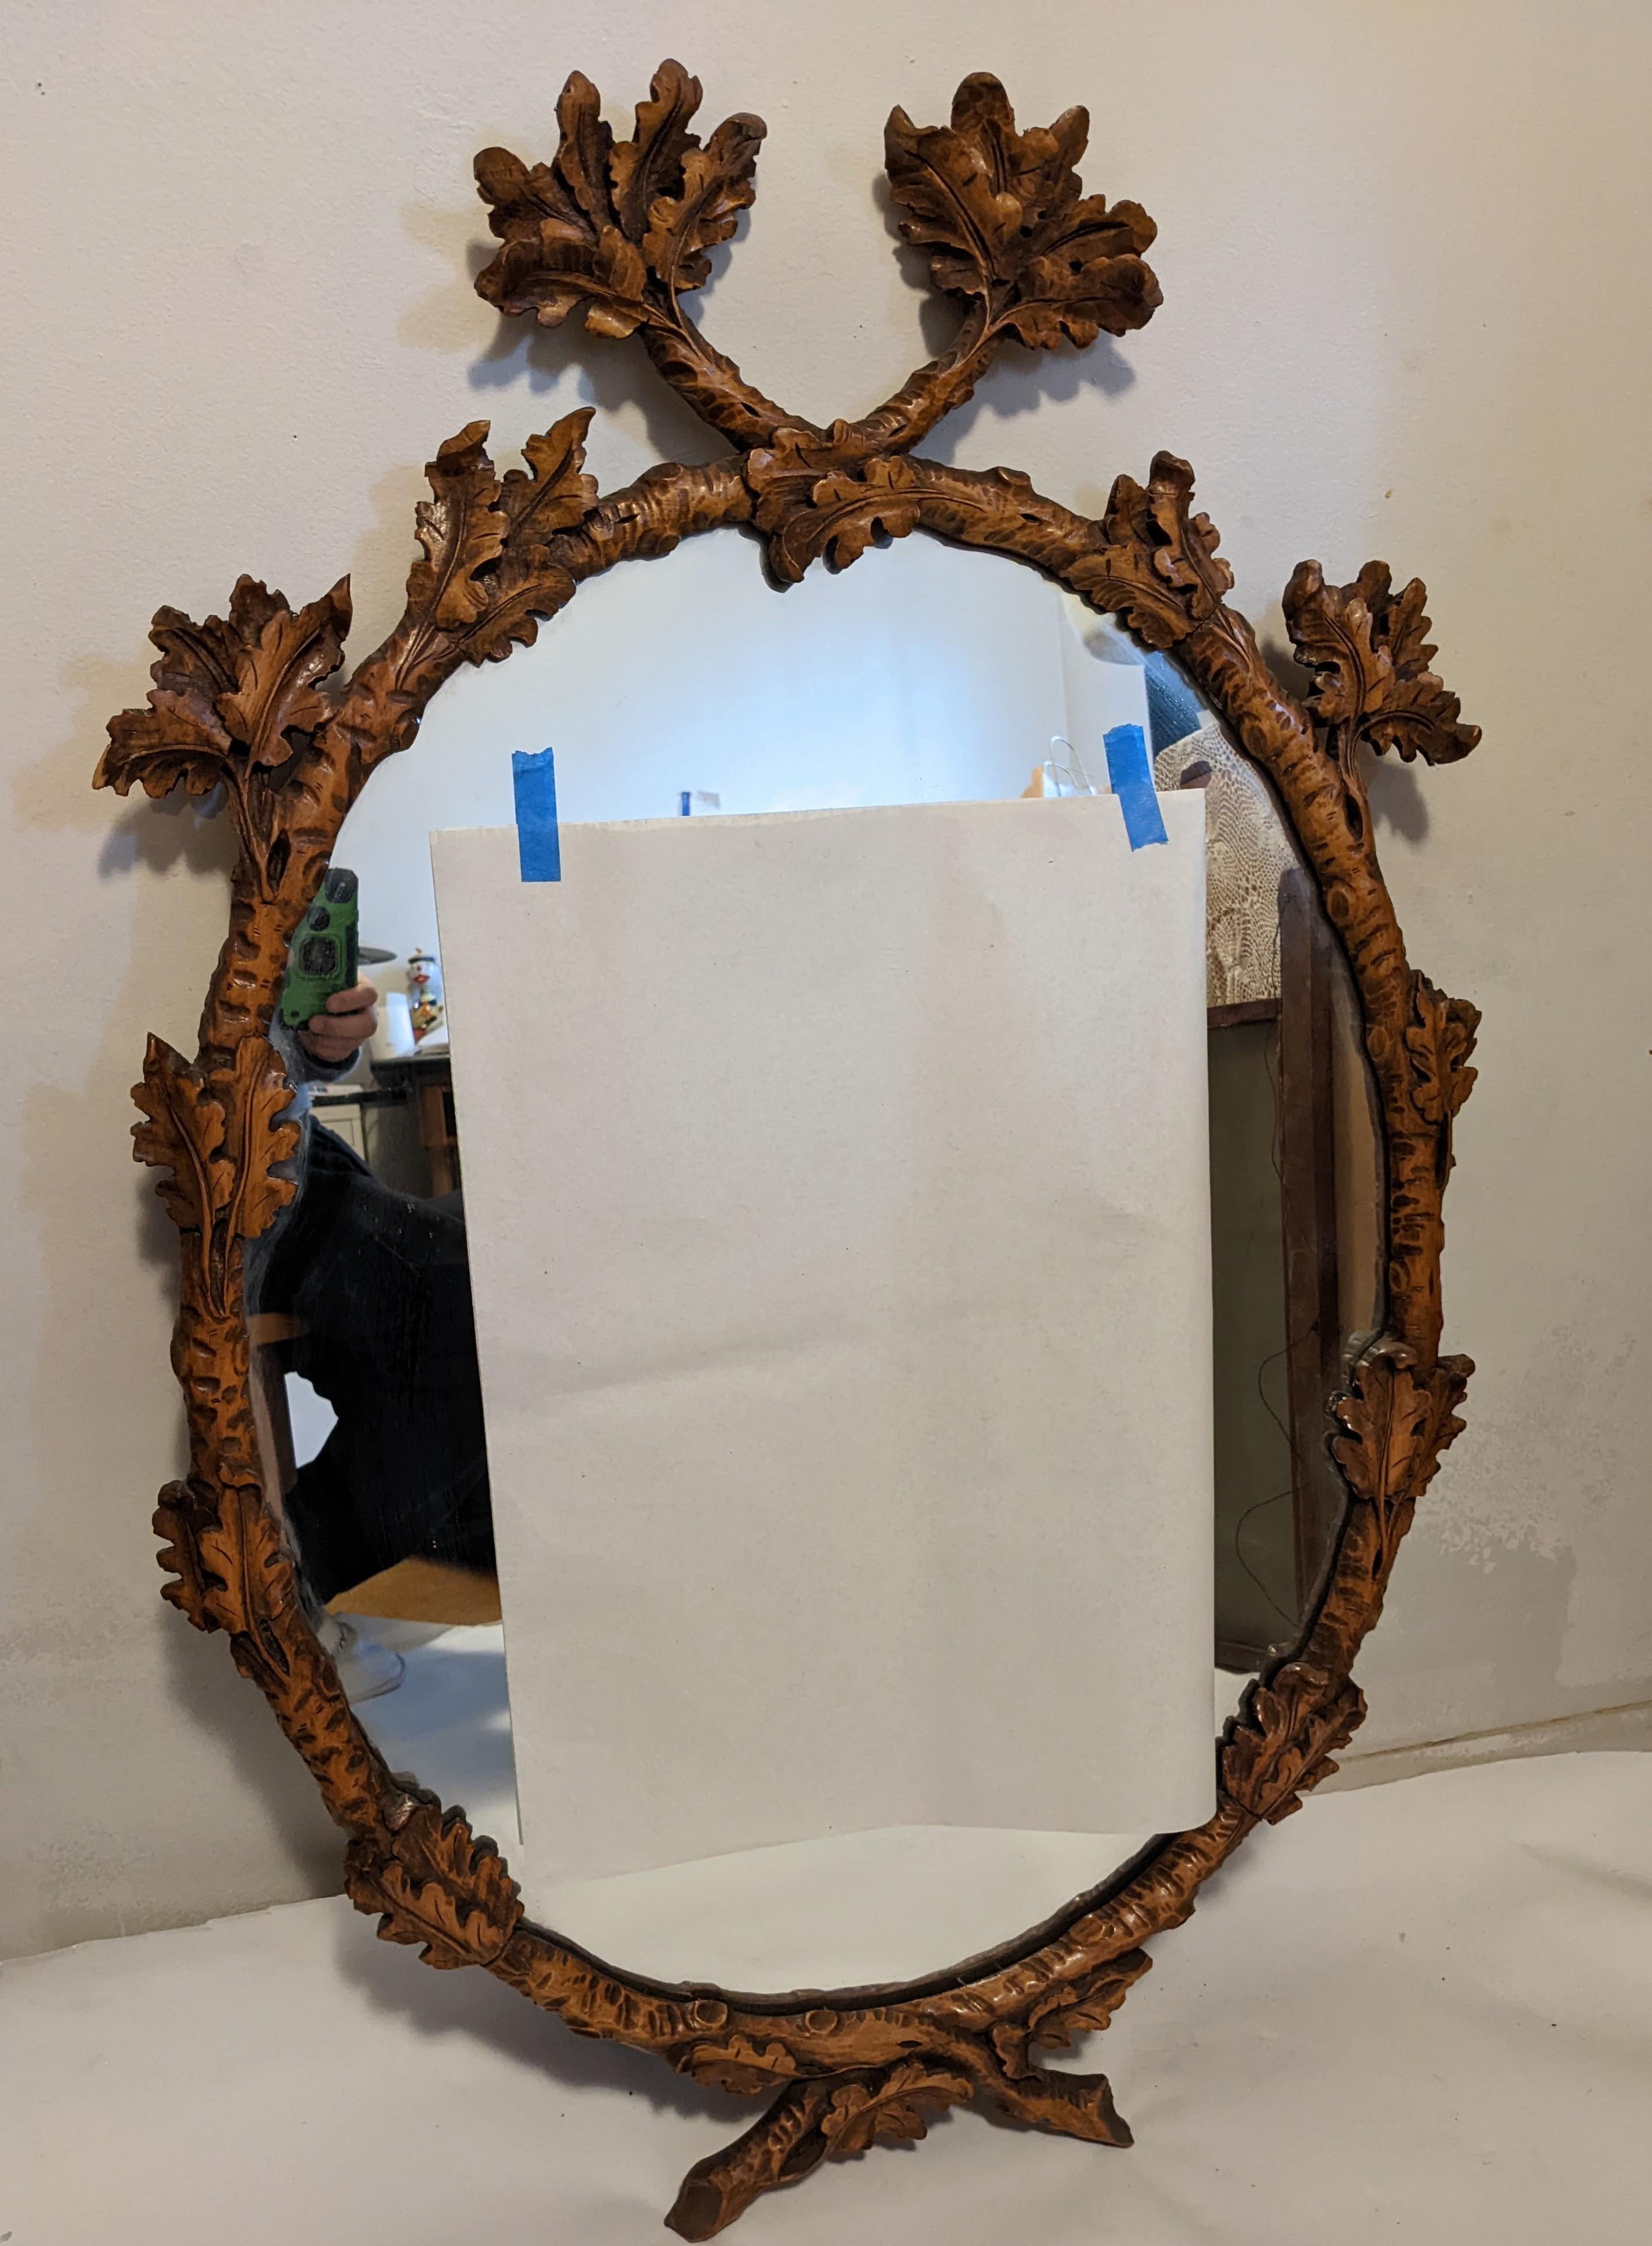 Elegant and impressive Black Forest hand carved oak leaf mirror from Germany 1890's. Beautifully hand carved with a border of oak leaf motifs around which cross on top to form a crown. Lovely warm brown tones.
Very good condition. One small chip